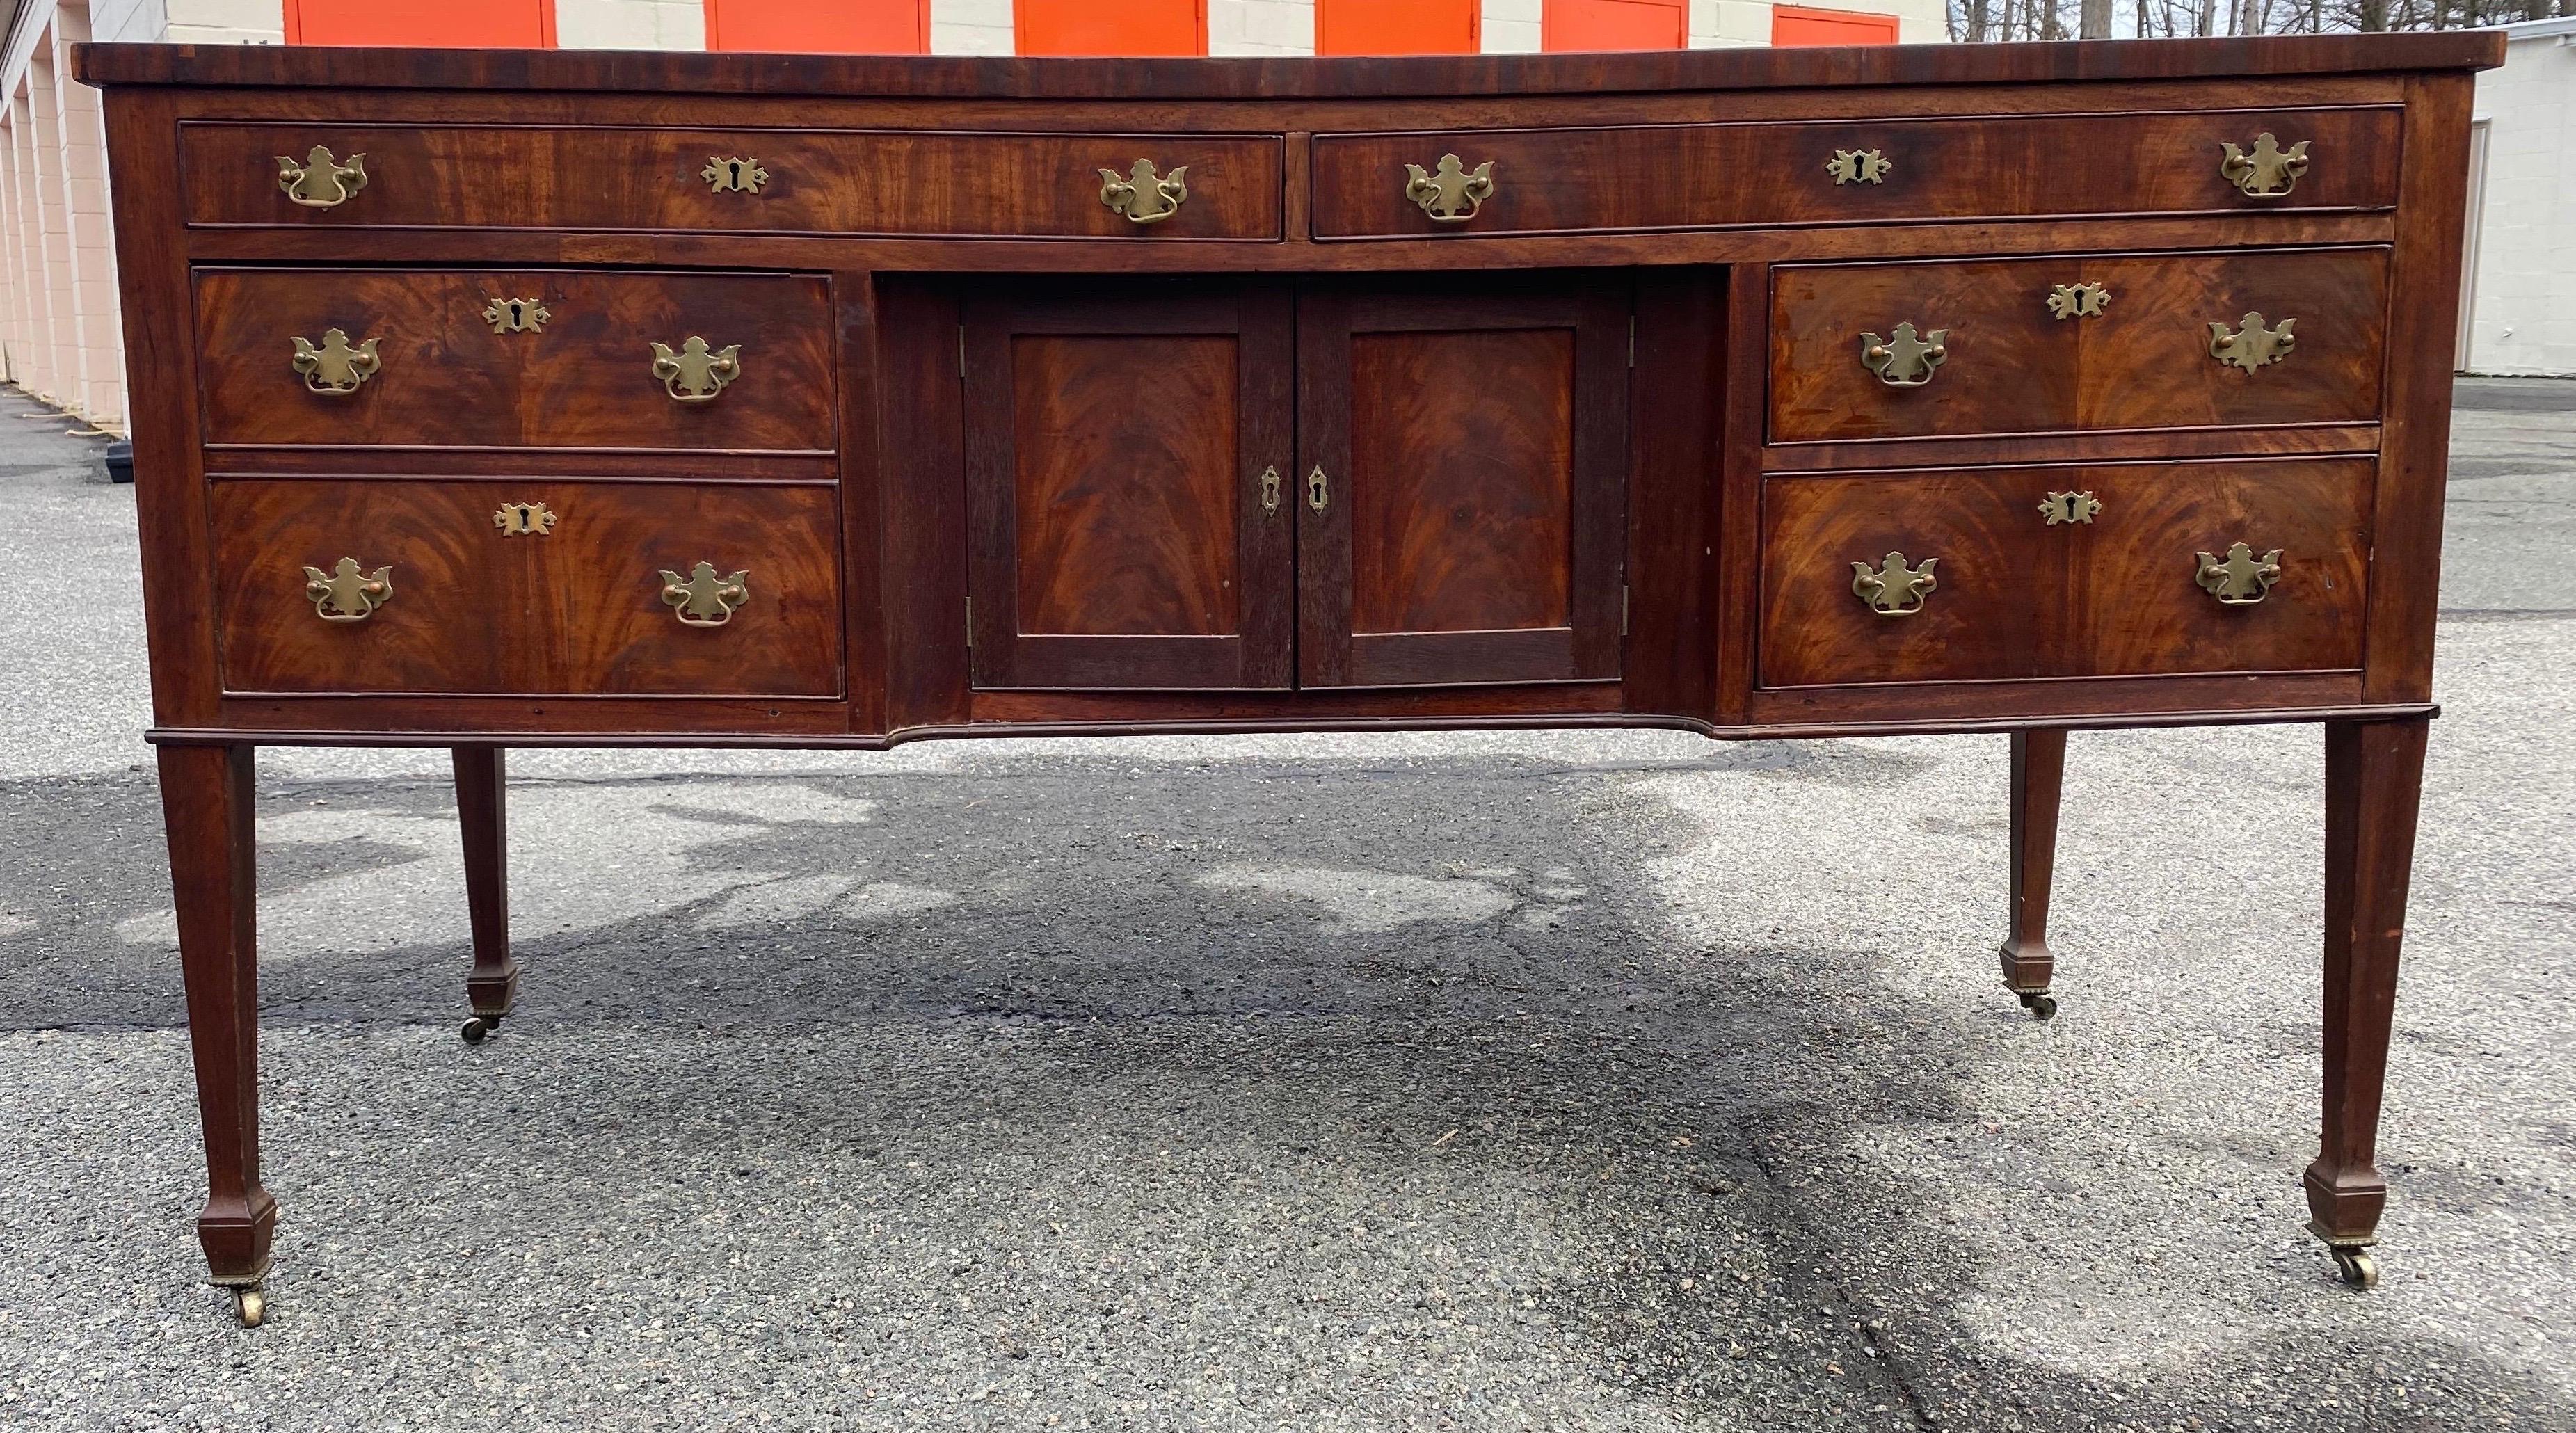 19th century American mahogany sideboard on tapered legs. Two drawers over cabinet doors which are flanked by a fitted double drawer on the left and two regular drawers on the right. Nice depth and color.